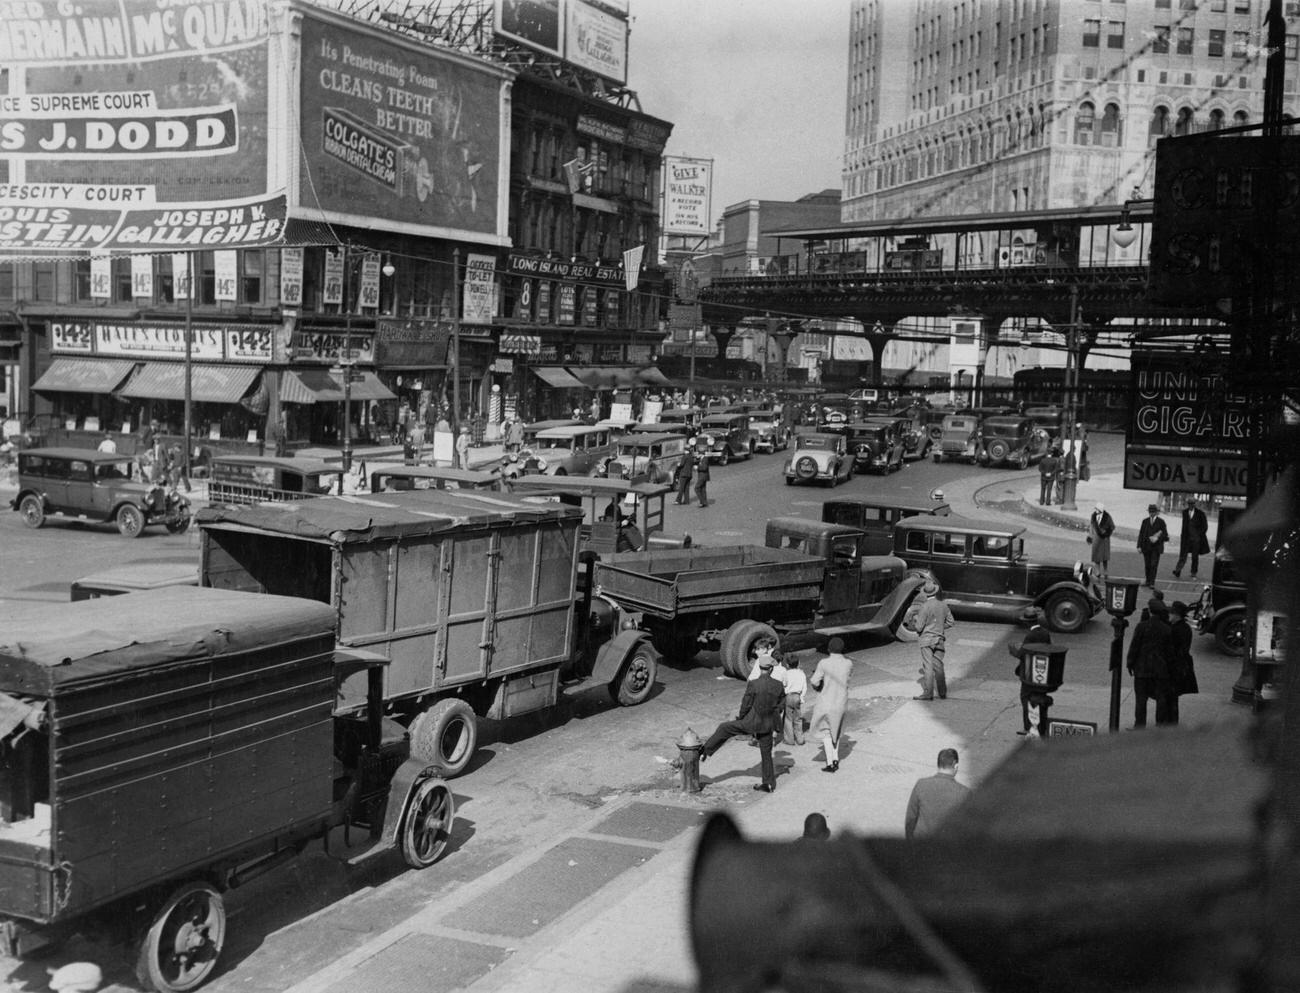 Traffic At Flatbush And Atlantic Intersection Featuring Election Poster And Elevated Railway, Brooklyn, 1929